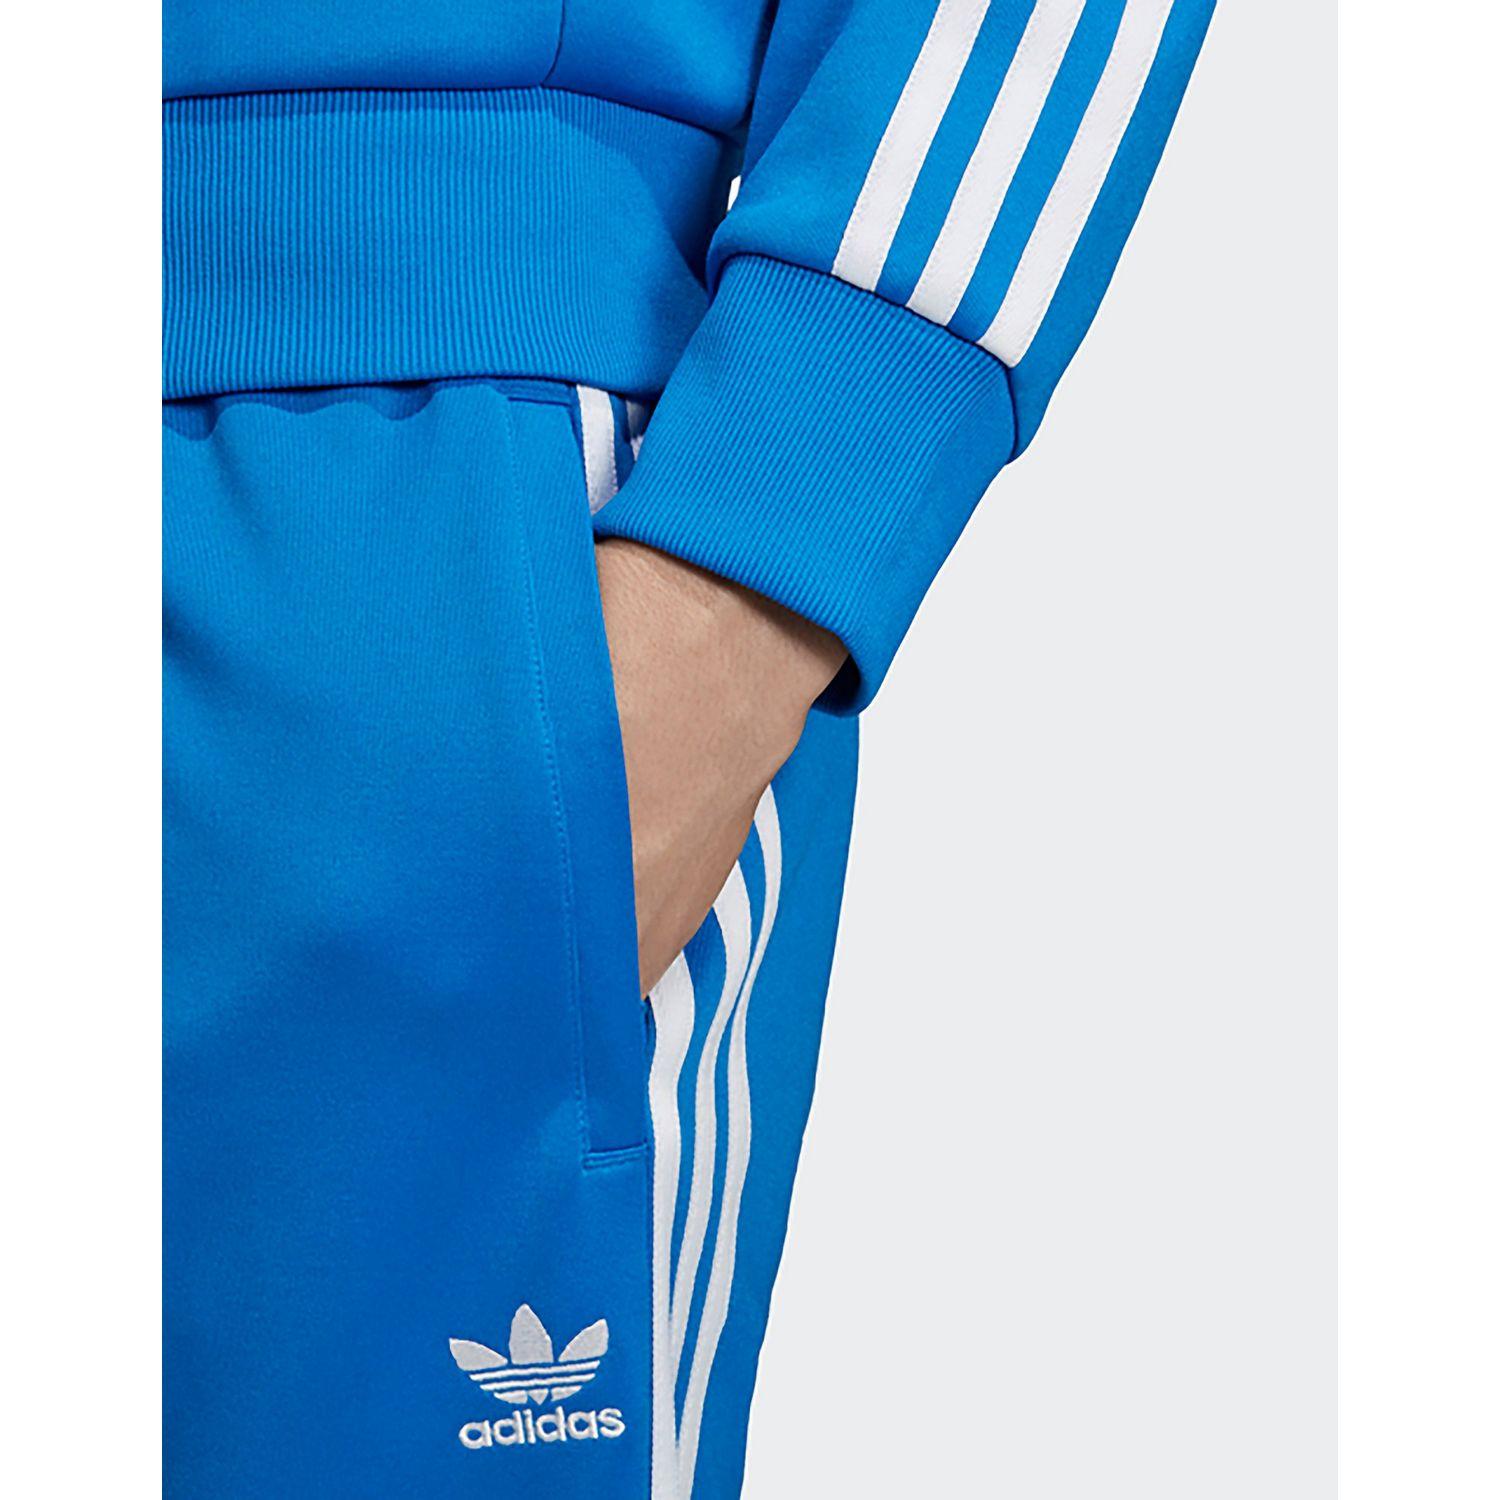 adidas Originals Synthetic Sst Tracksuit Bottom in Blue for Men - Lyst